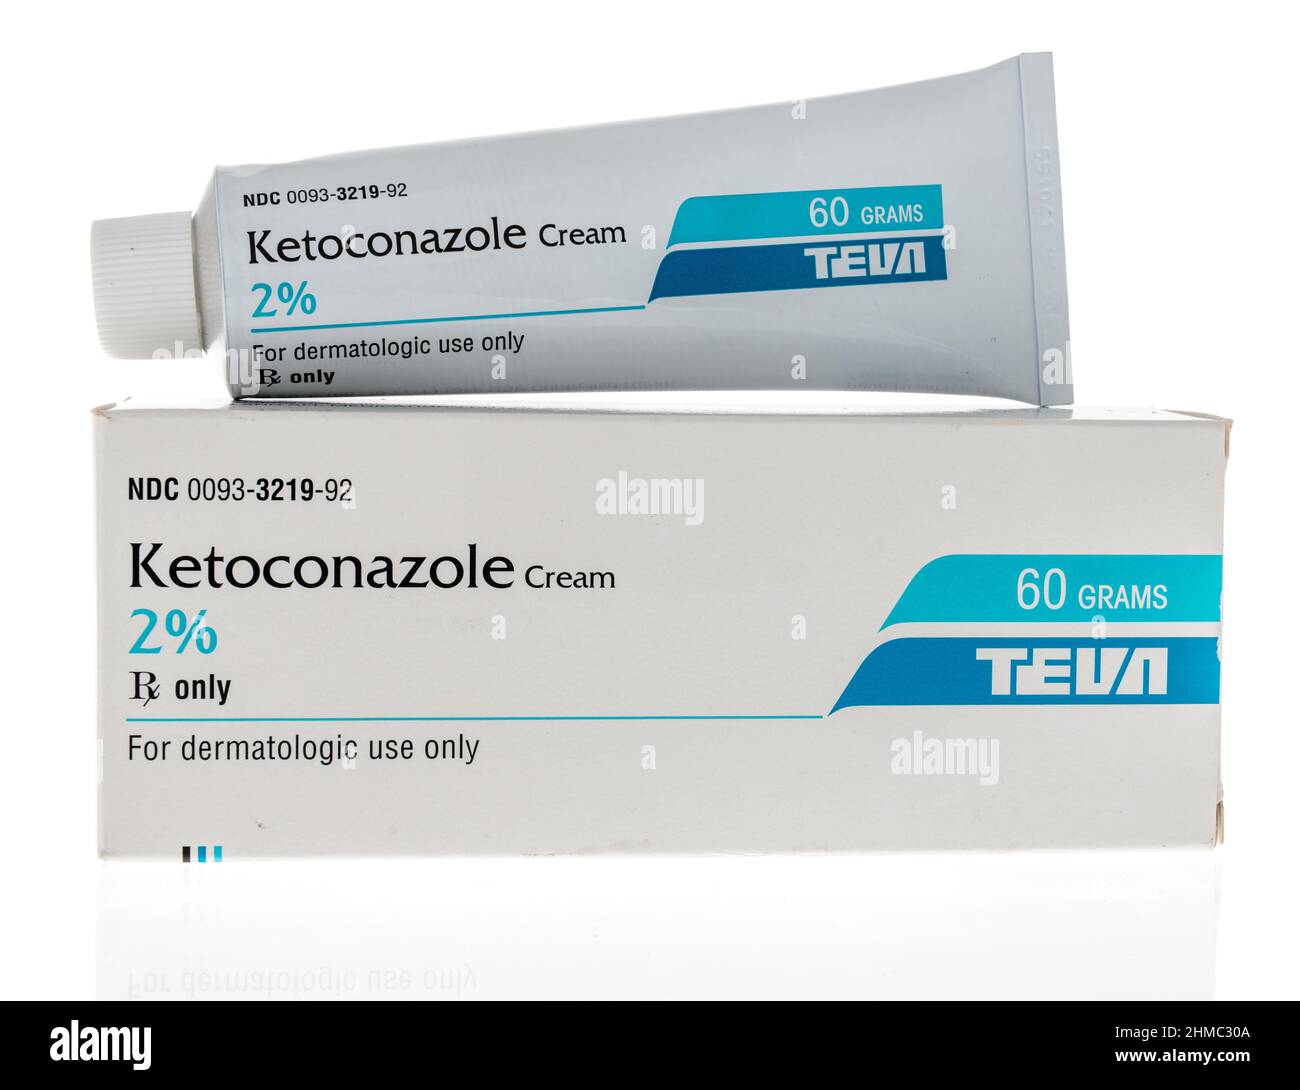 Winneconne, WI -8 February 2021: A package of Tevu Ketoconazole cream  on an isolated background Stock Photo